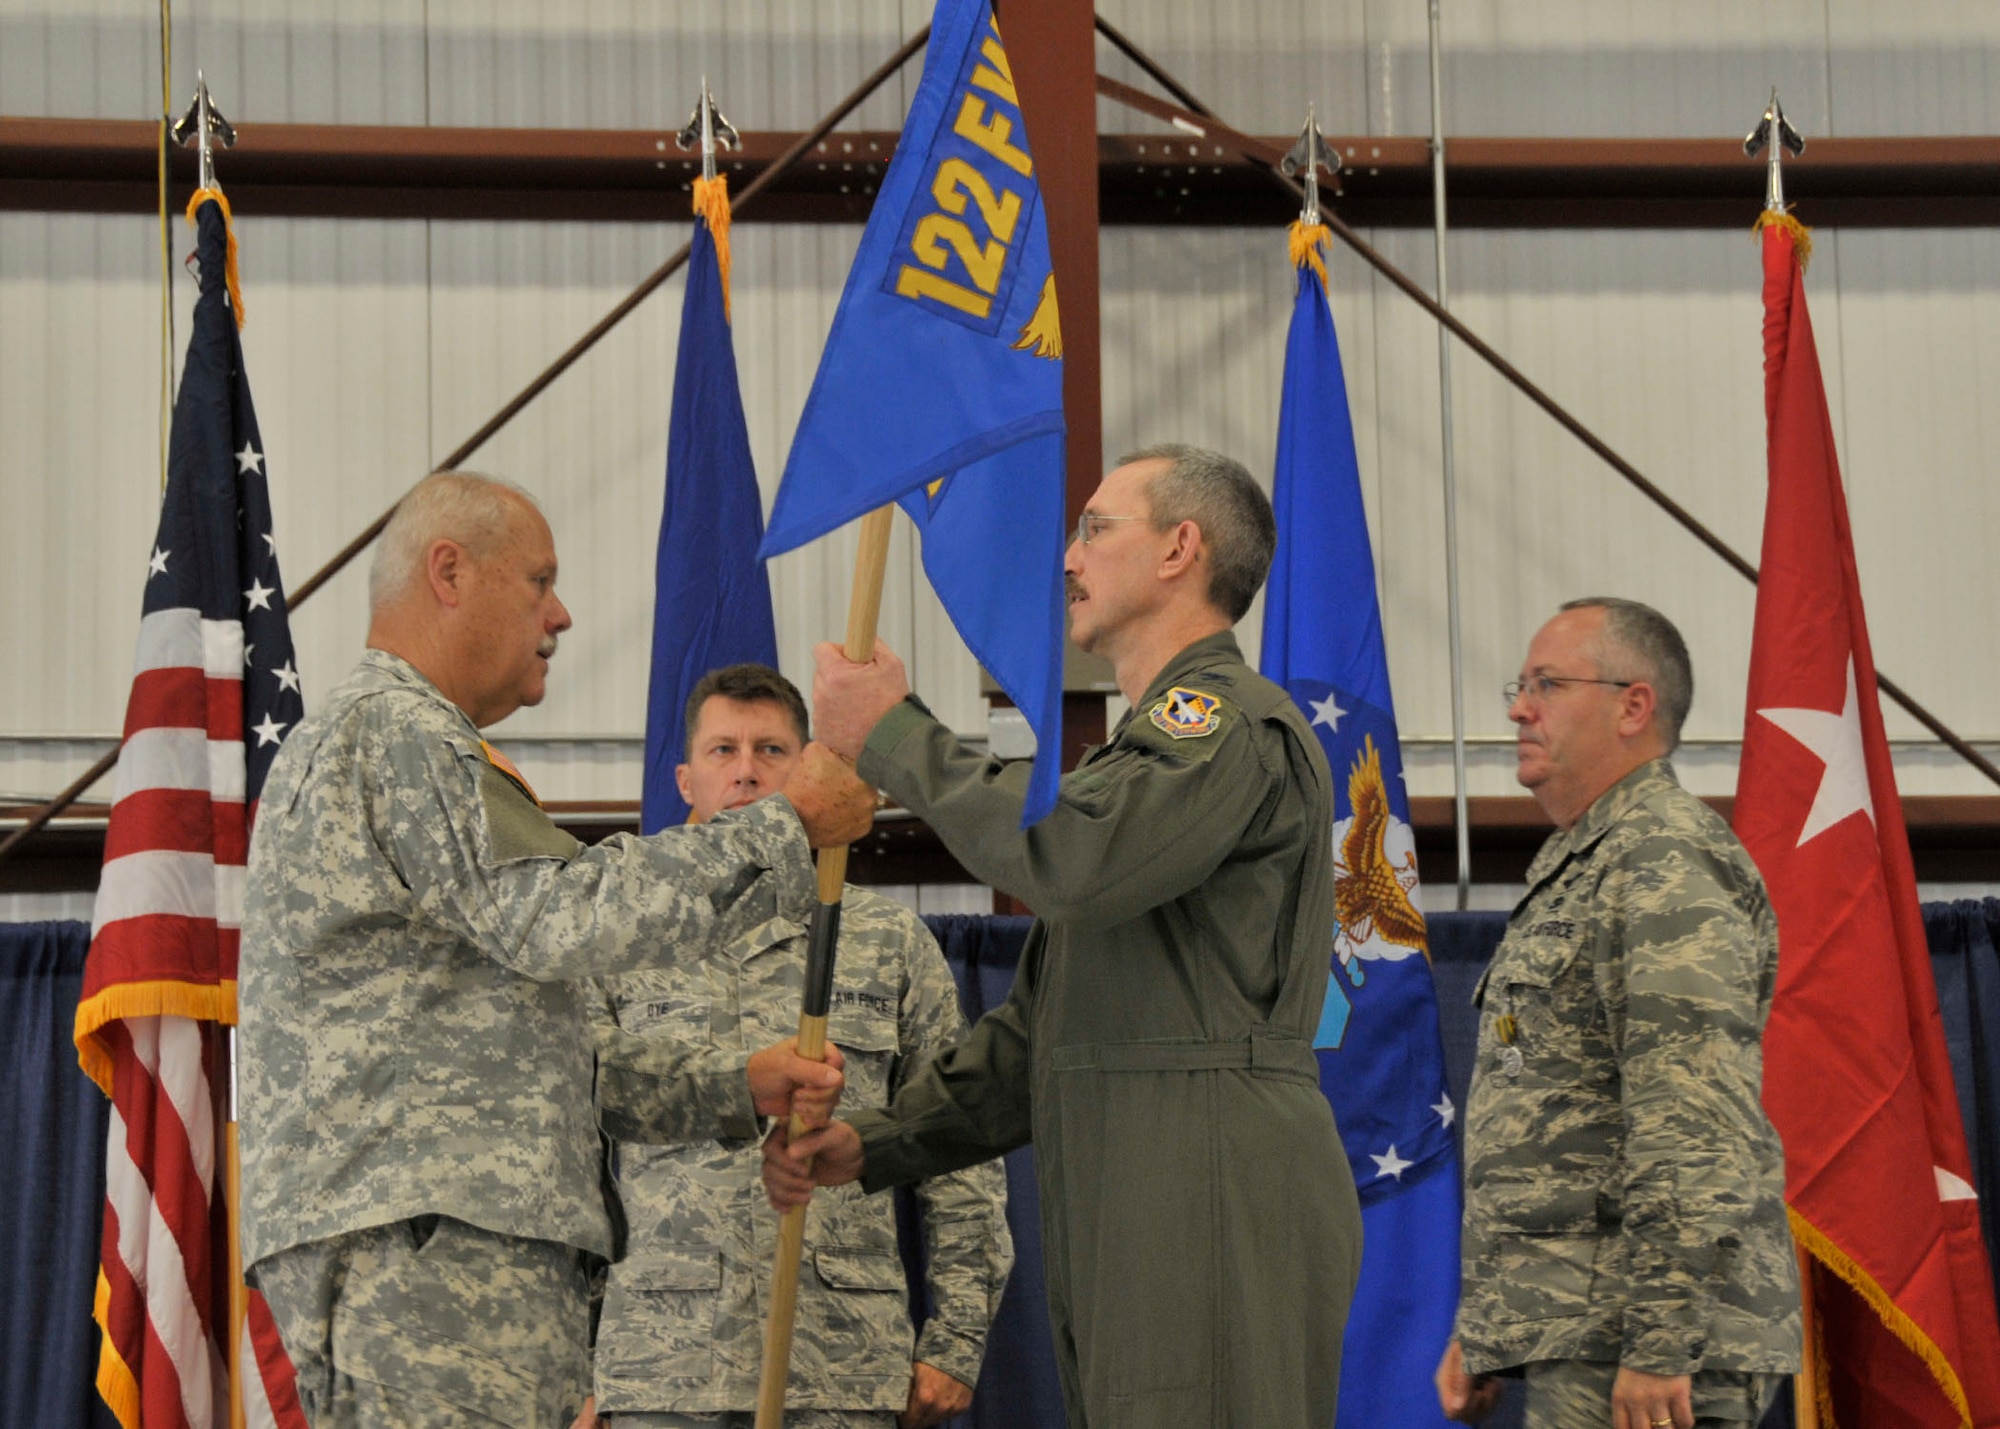 Col. Patrick R. Renwick (center), newly appointed Commander of the 122nd Fighter Wing, Fort Wayne Air National Guard Base, Fort Wayne,  Indiana, hands the wing guidon to Maj. Gen. R. Martin Umbarger (left), the Adjutant General of Indiana, as he assumes command of the wing following the retirement of former wing commander Col. David L. Augustine (right), Sep. 13, 2014. Augustine served as 122FW Commander for over three years. Renwick arrived from the 181st Intelligence Wing, Terra Haute, Indiana, where he served as Vice Commander for three years. (Air National Guard photo by Senior Airman Joseph Boals/Released)